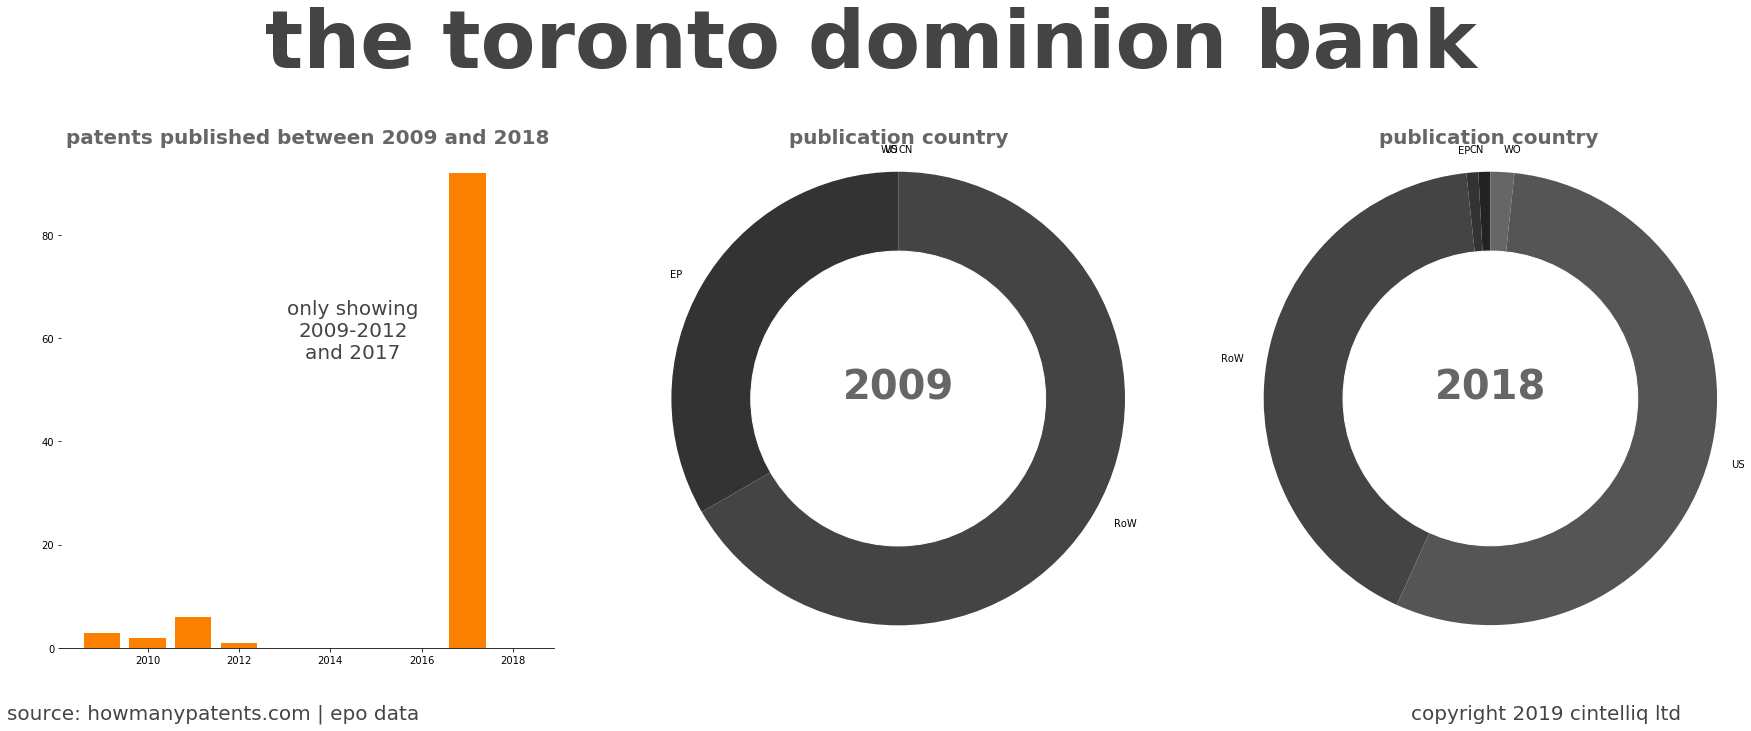 summary of patents for The Toronto Dominion Bank